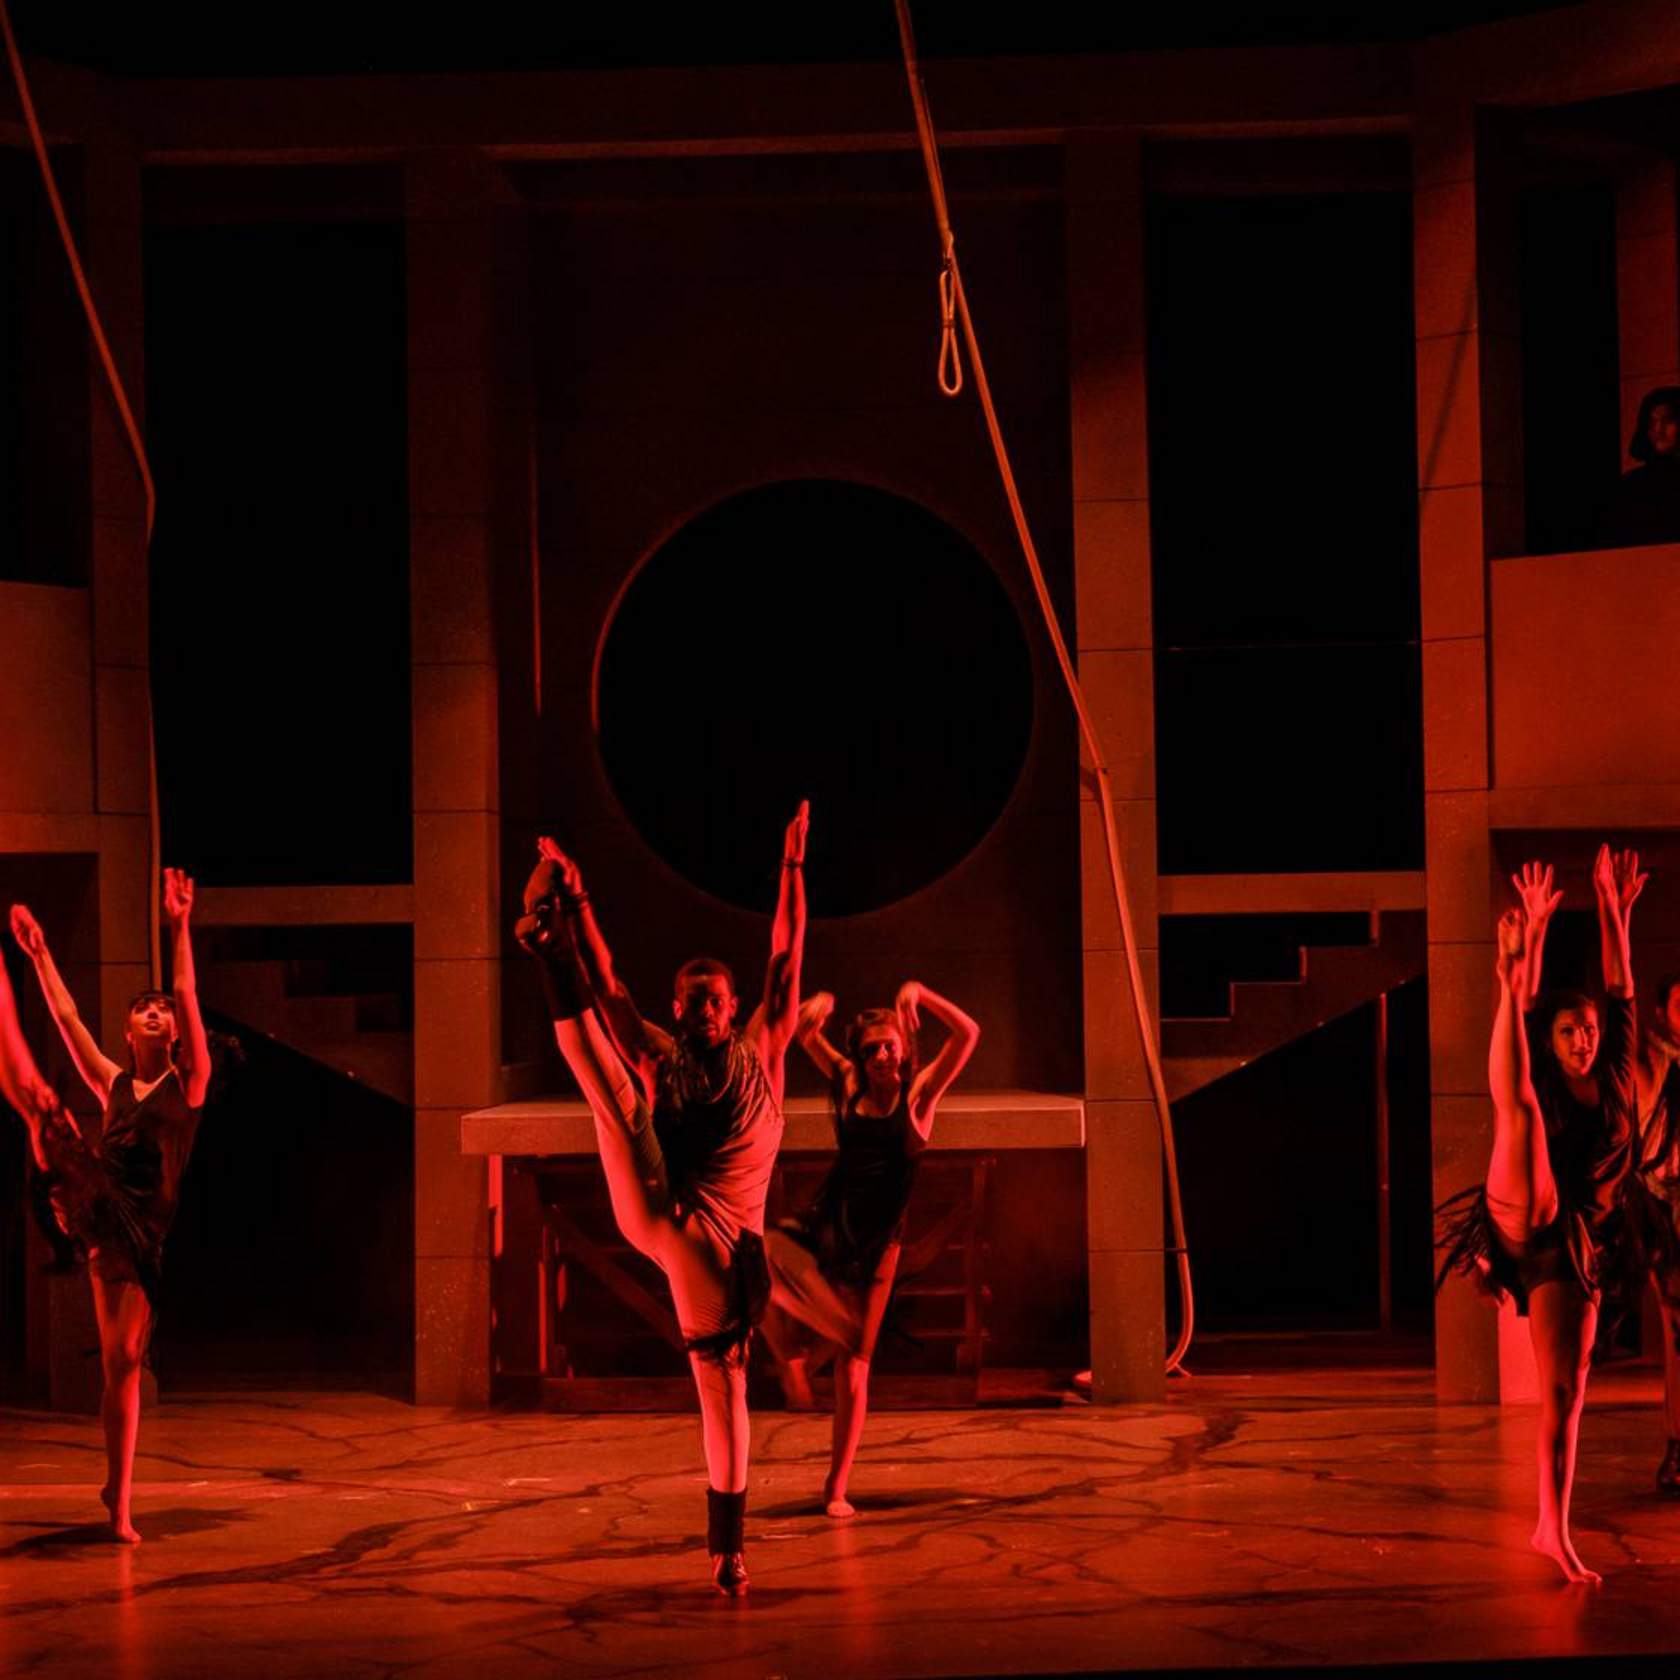 Dancers with legs raised, lit in red. 